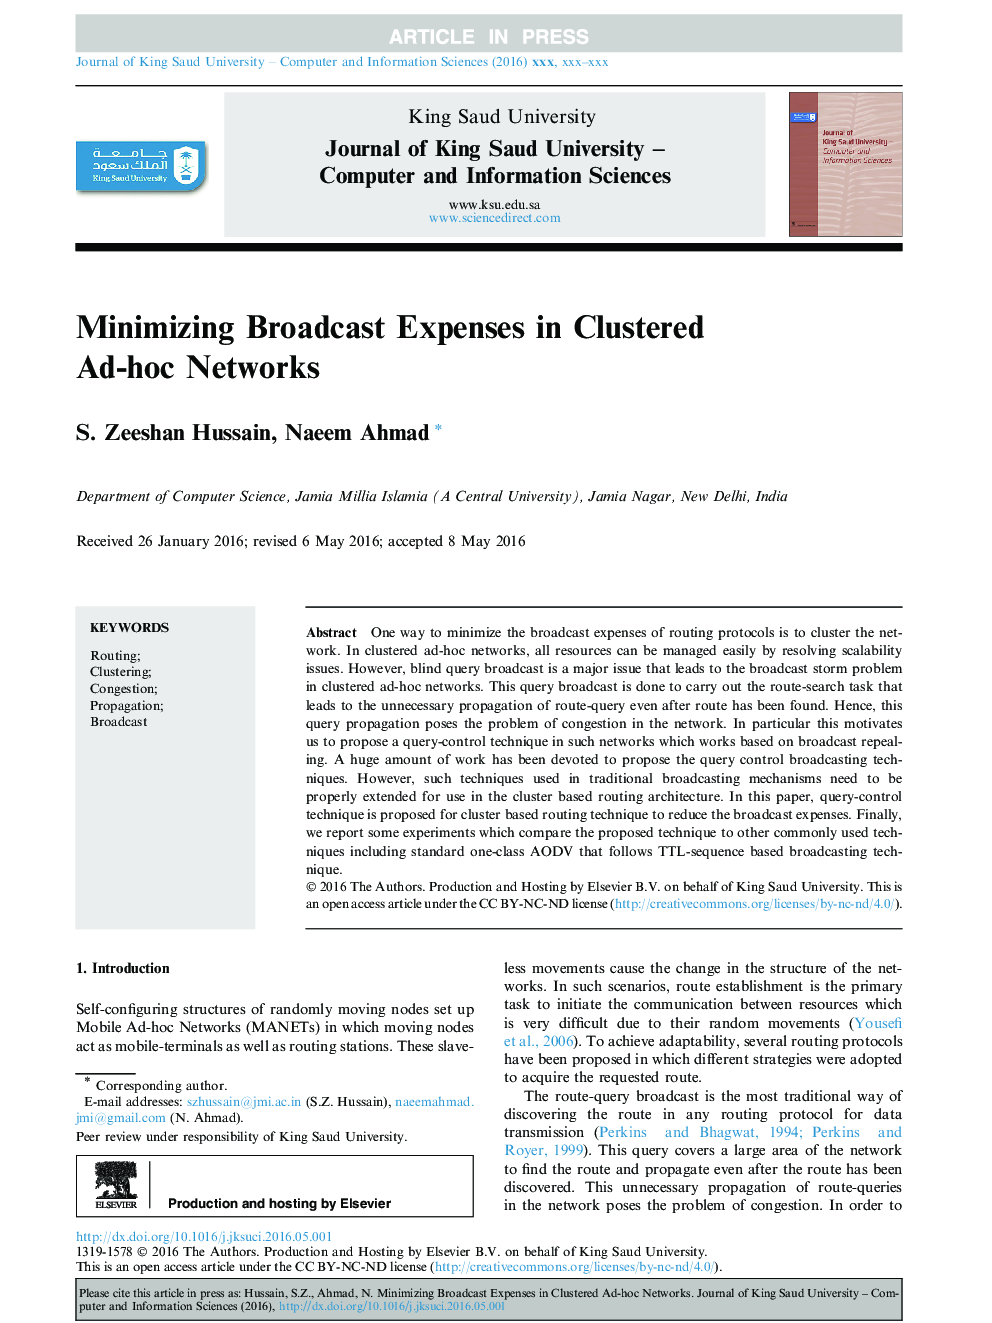 Minimizing Broadcast Expenses in Clustered Ad-hoc Networks